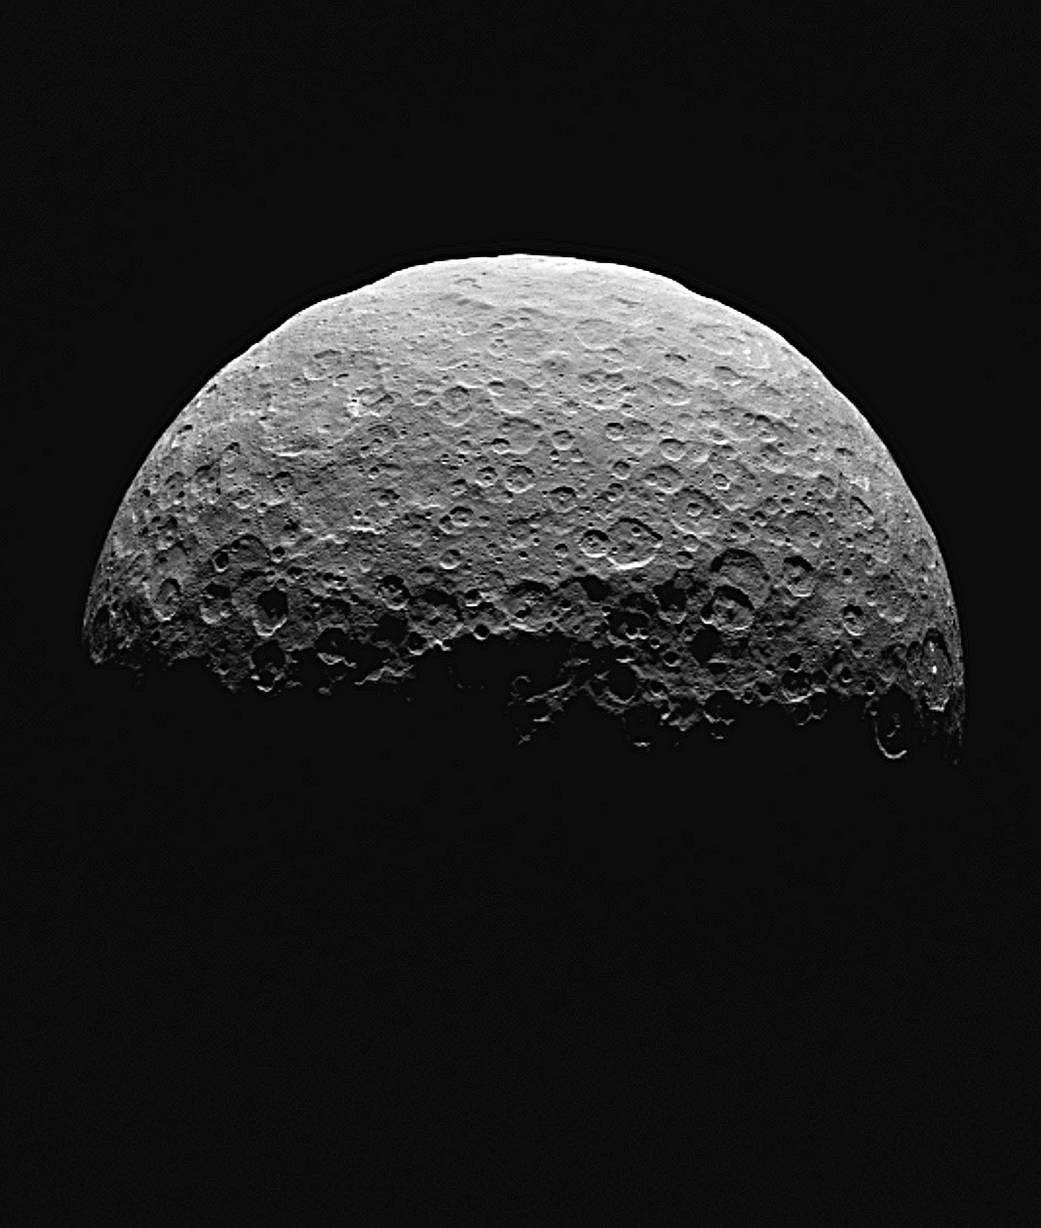 This image shows northern terrain on the sunlit side of dwarf planet Ceres